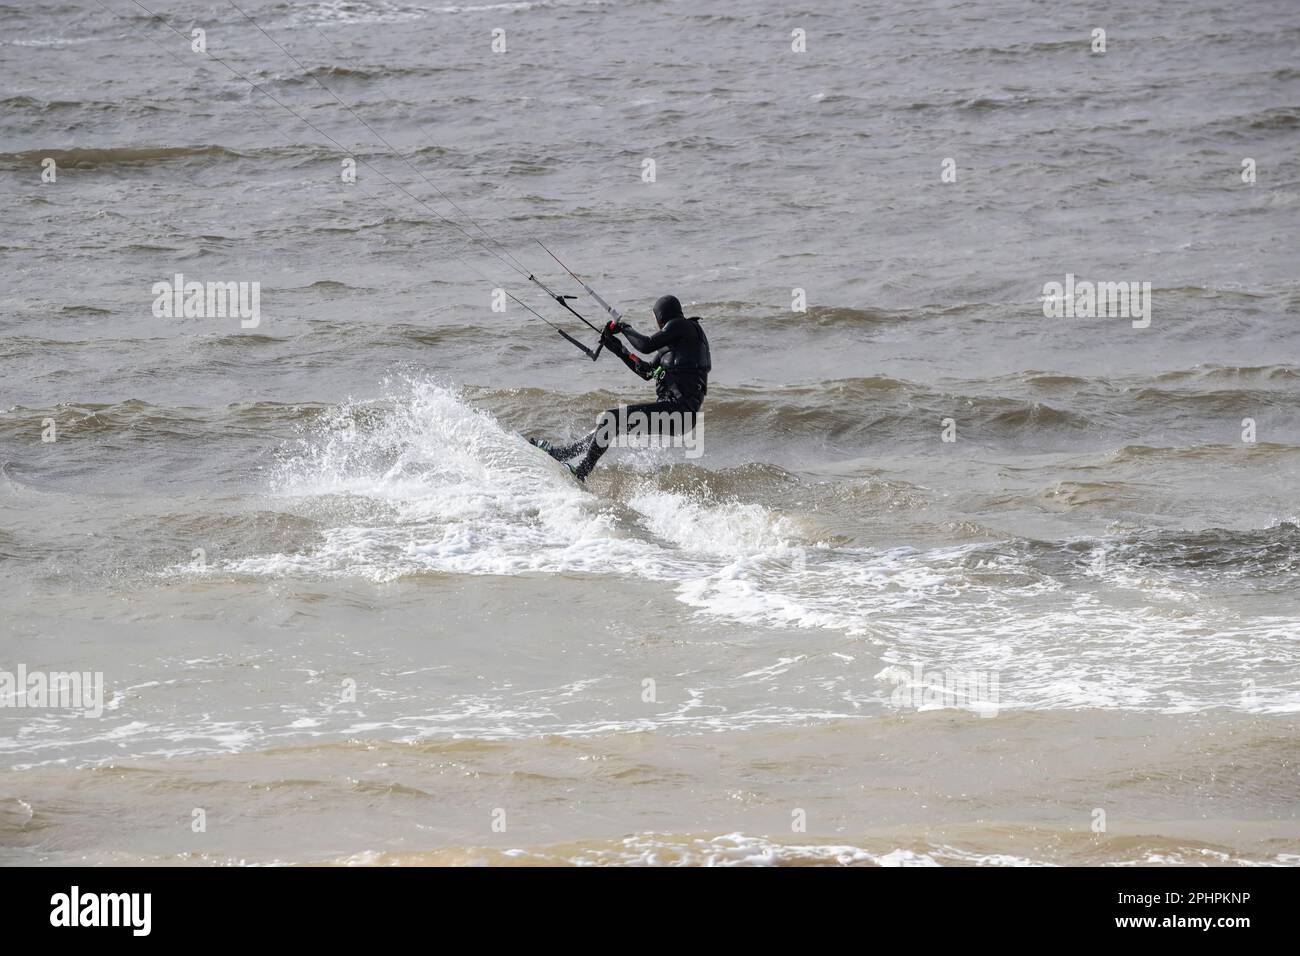 Kitesurfer enjoying the thrills of surfing on choppy and wavy water on the West shore of Llandudno in windy conditions Stock Photo